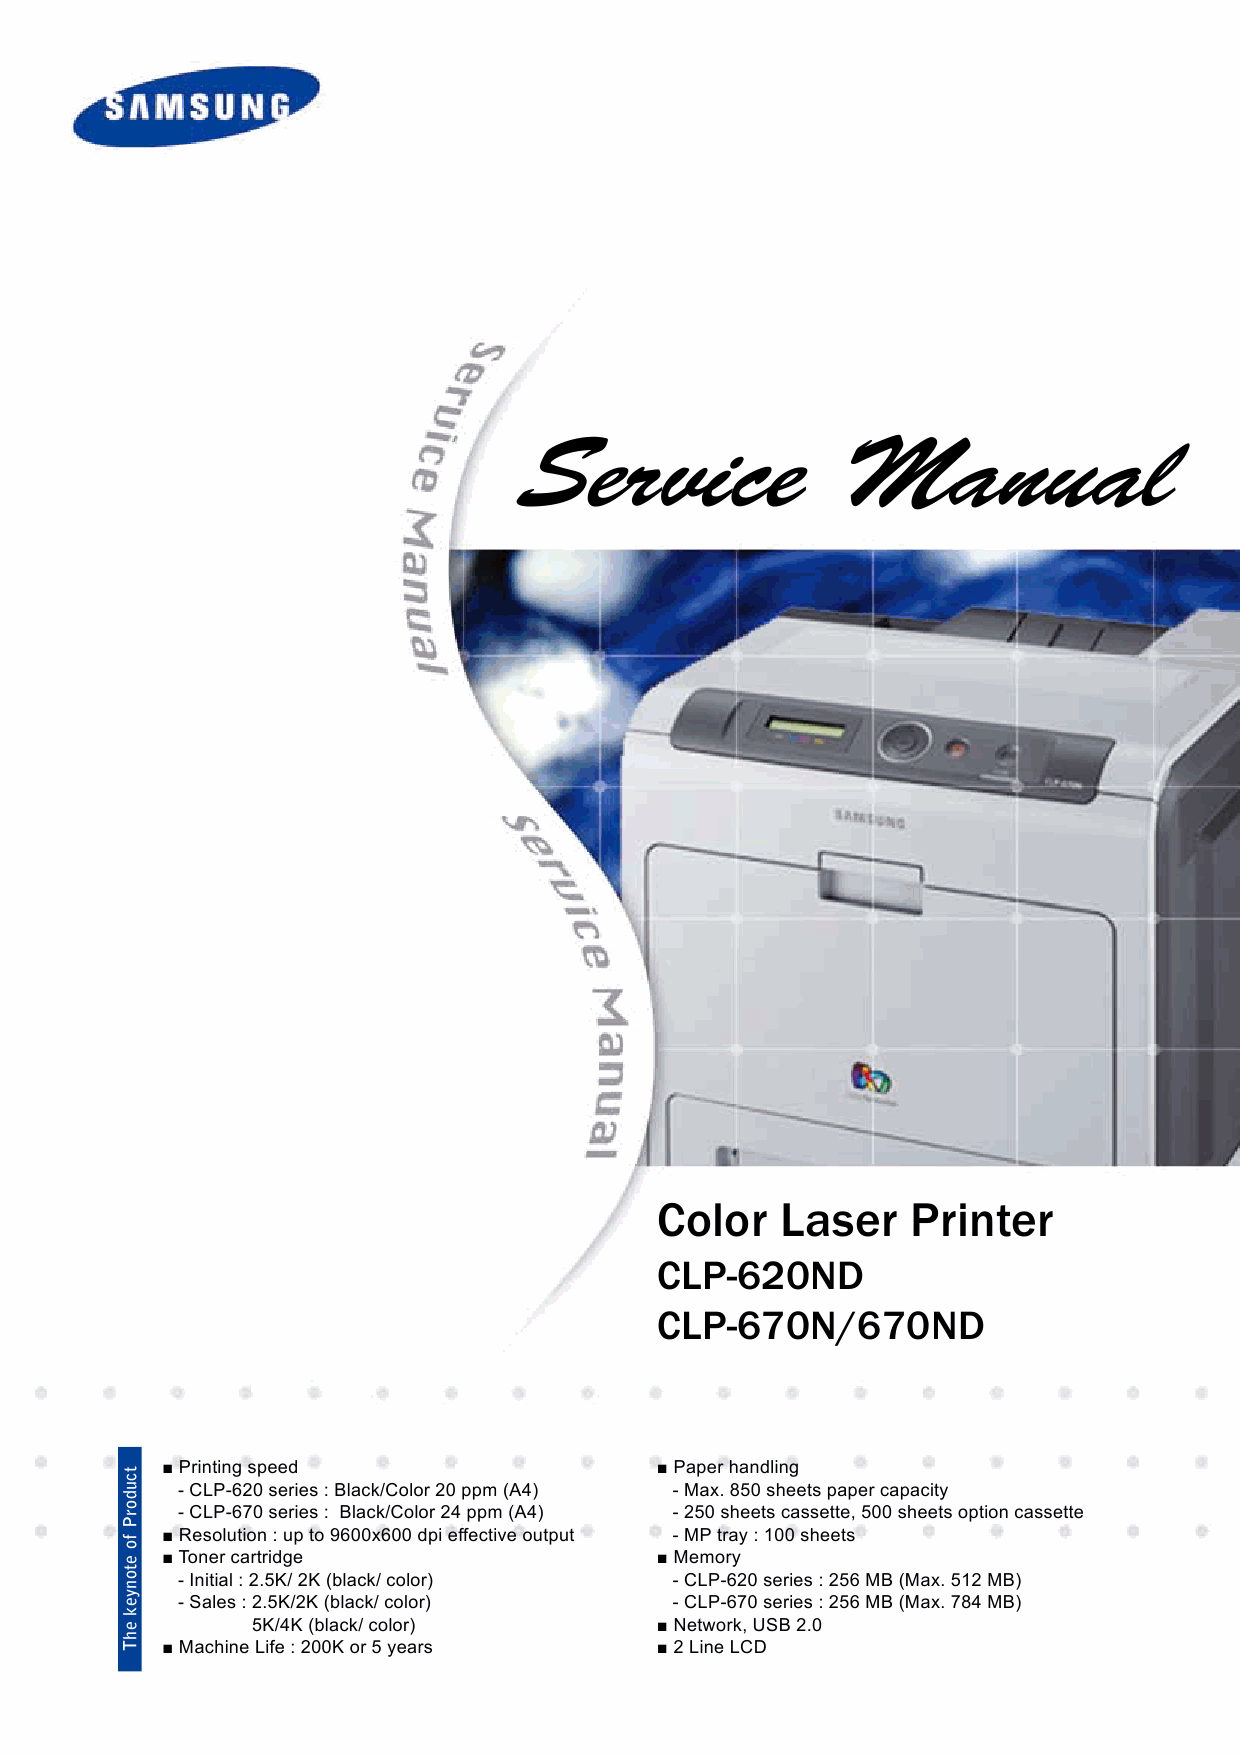 Samsung Color-Laser-Printer CLP-620ND 670N 670ND Parts and Service Manual-1